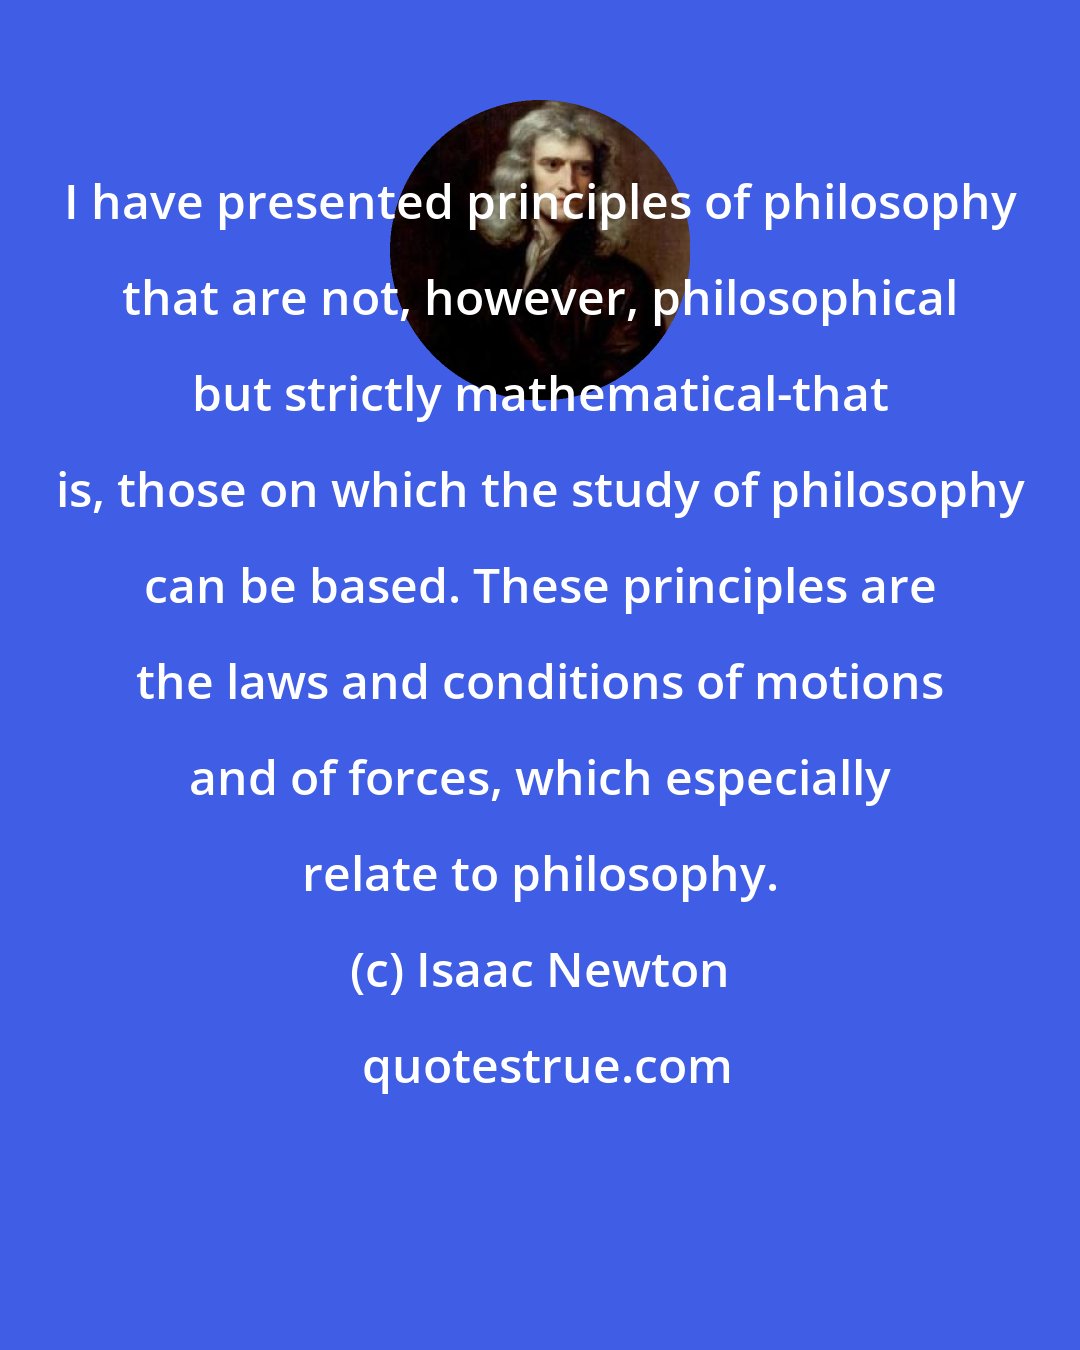 Isaac Newton: I have presented principles of philosophy that are not, however, philosophical but strictly mathematical-that is, those on which the study of philosophy can be based. These principles are the laws and conditions of motions and of forces, which especially relate to philosophy.